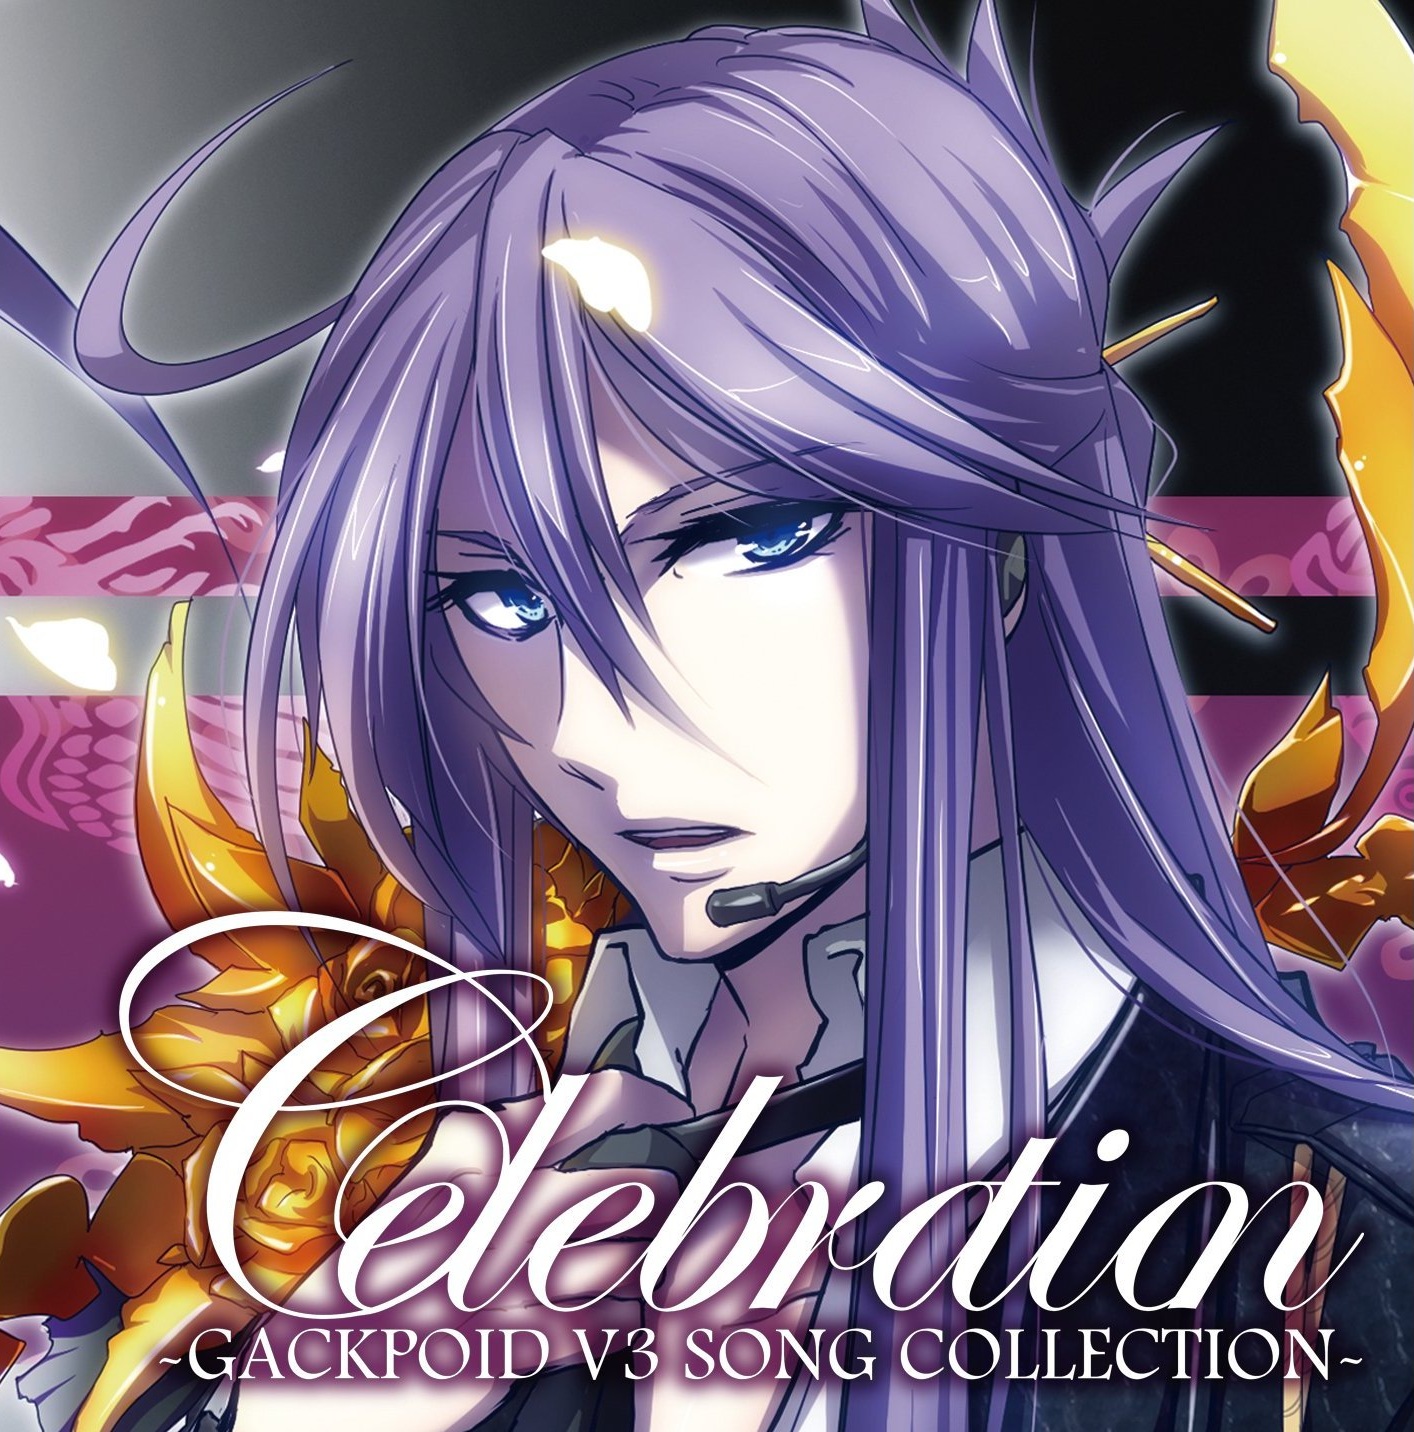 Celebration -GACKPOID V3 SONG COLLECTION- - Various artists 